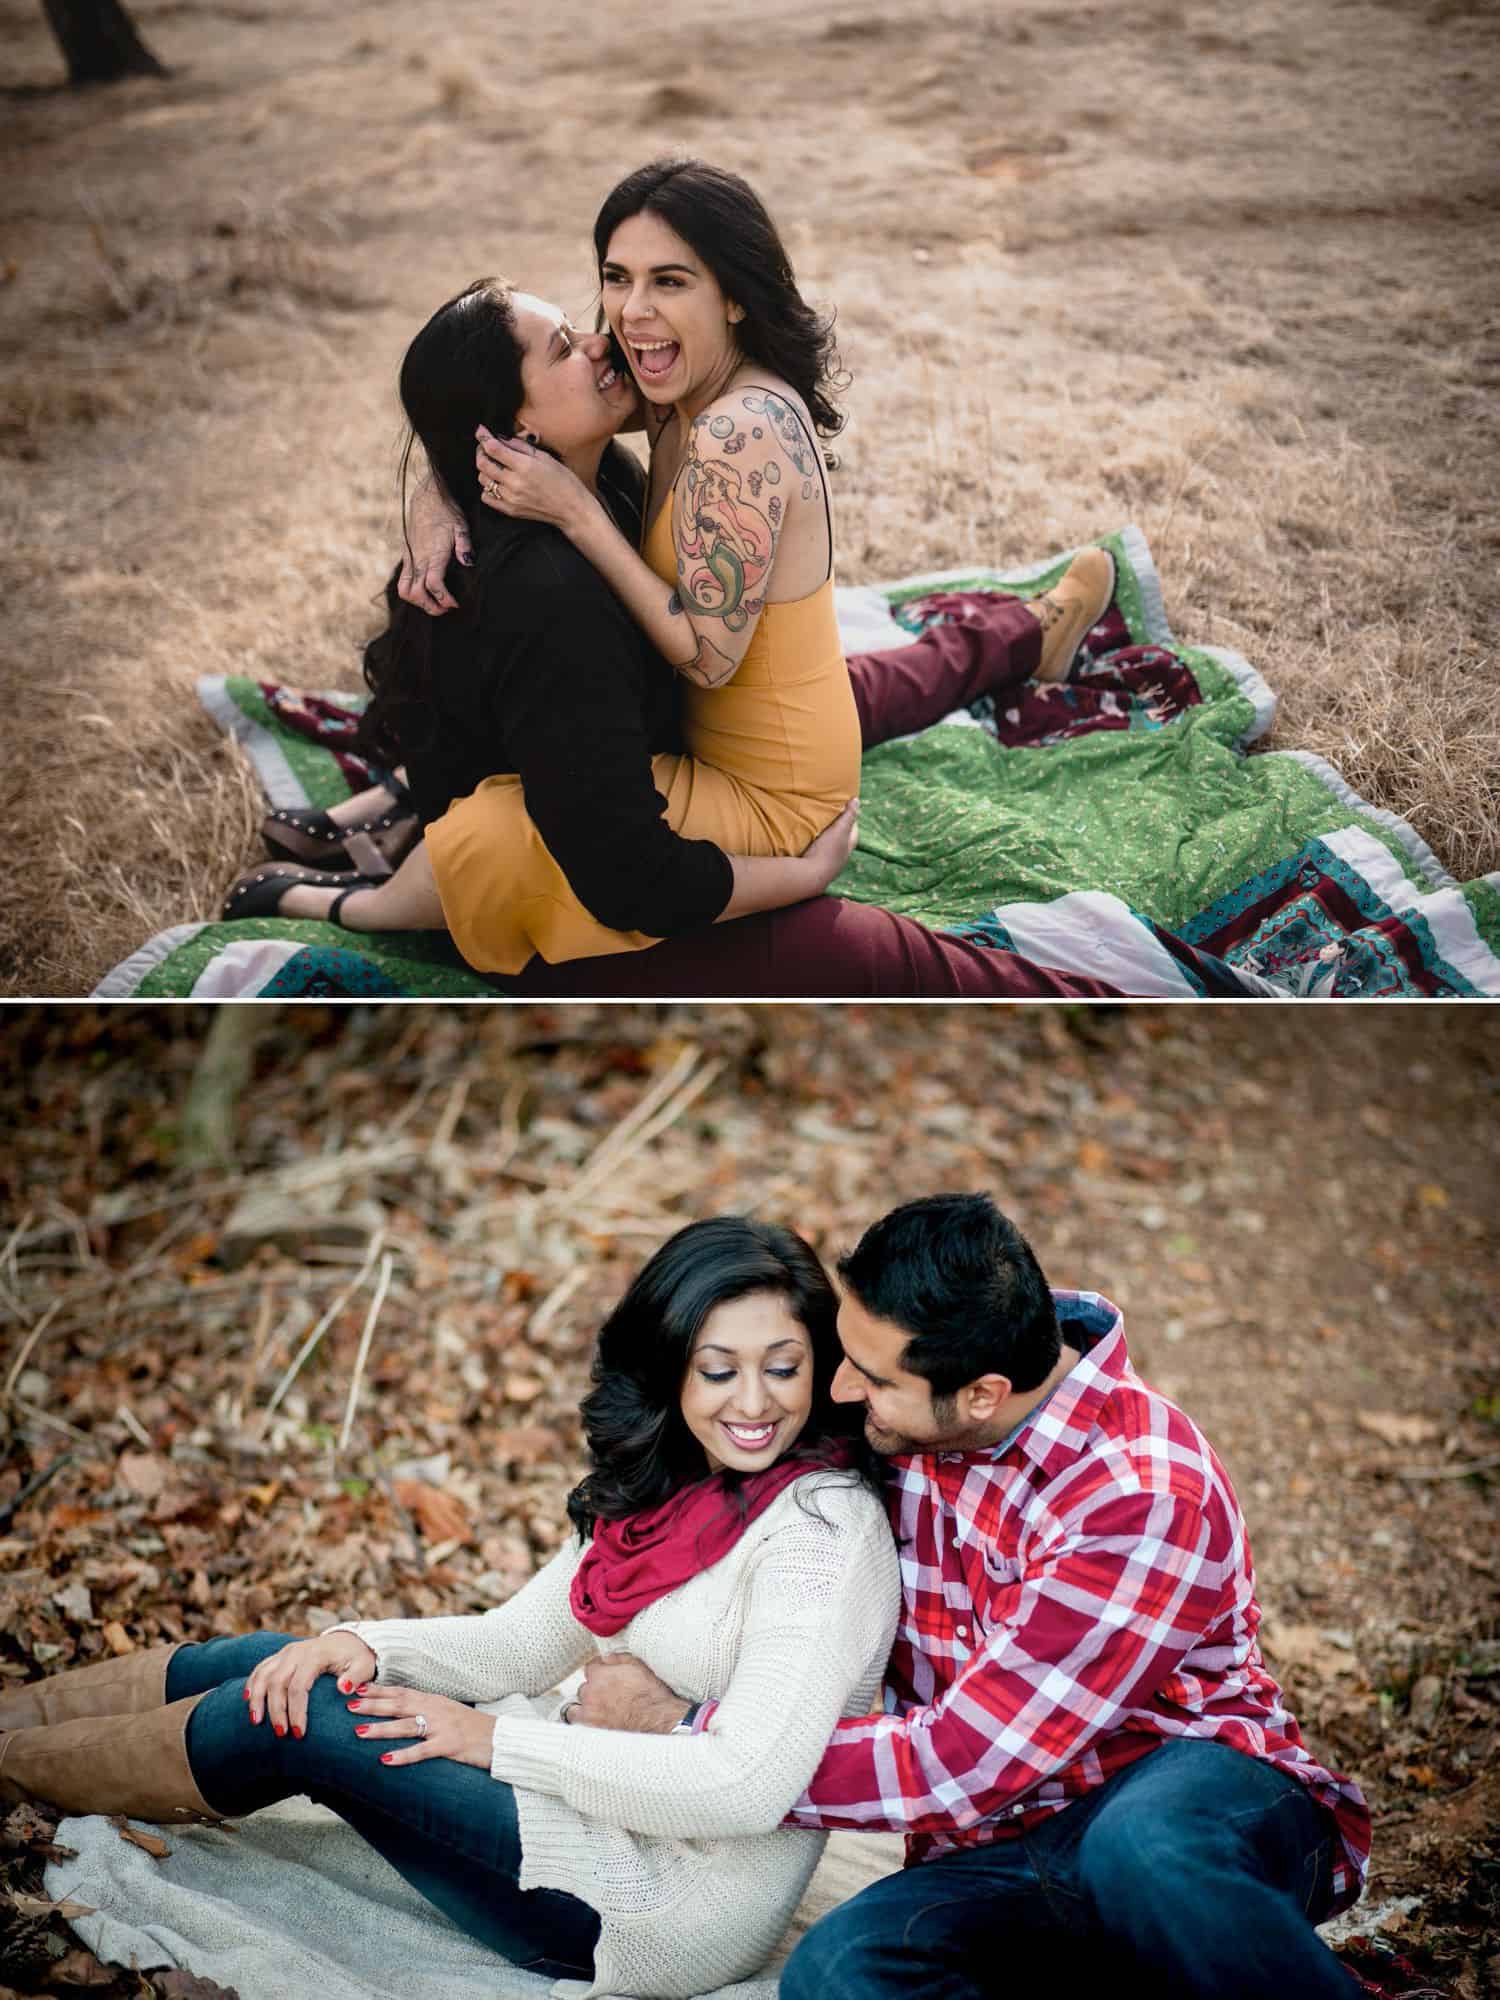 Creative Photoshoot Ideas For Couples | 99inspiration